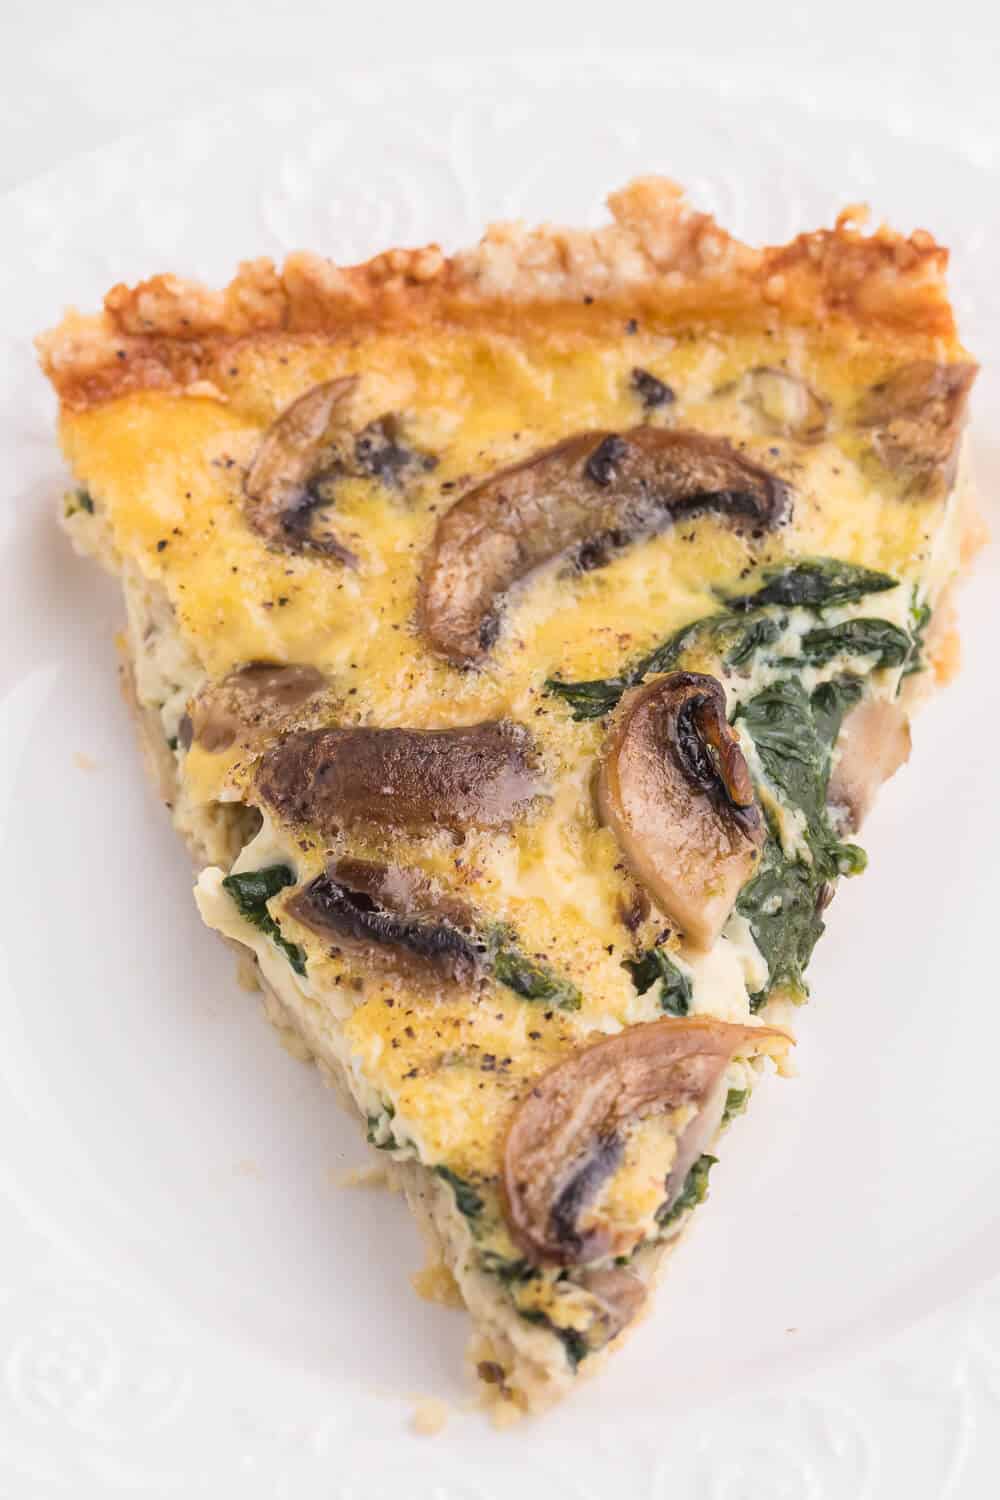 Spinach Mushroom Quiche- Fresh baby spinach, sliced mushrooms nestled in a creamy blend of eggs!